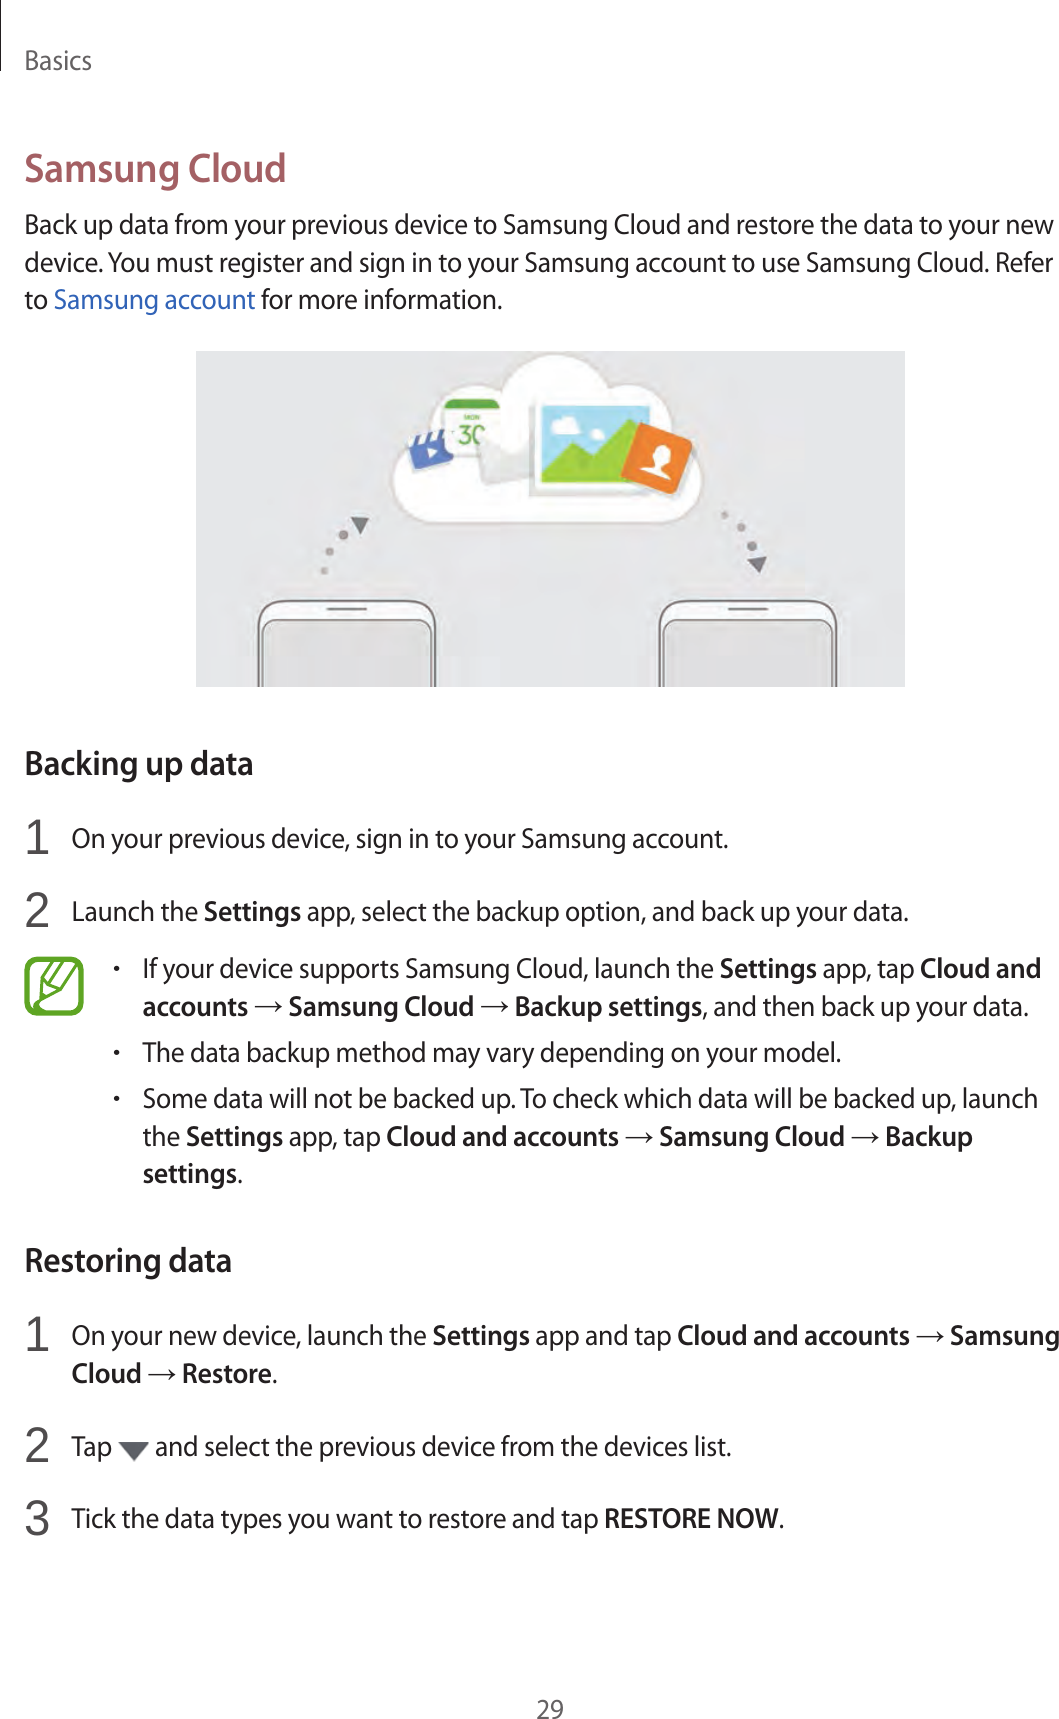 Basics29Samsung CloudBack up data from your previous device to Samsung Cloud and restore the data to your new device. You must register and sign in to your Samsung account to use Samsung Cloud. Refer to Samsung account for more information.Backing up data1  On your previous device, sign in to your Samsung account.2  Launch the Settings app, select the backup option, and back up your data.•If your device supports Samsung Cloud, launch the Settings app, tap Cloud andaccounts → Samsung Cloud → Backup settings, and then back up your data.•The data backup method may vary depending on your model.•Some data will not be backed up. To check which data will be backed up, launchthe Settings app, tap Cloud and accounts → Samsung Cloud → Backupsettings.Restoring data1  On your new device, launch the Settings app and tap Cloud and accounts → SamsungCloud → Restore.2  Tap   and select the previous device from the devices list.3  Tick the data types you want to restore and tap RESTORE NOW.